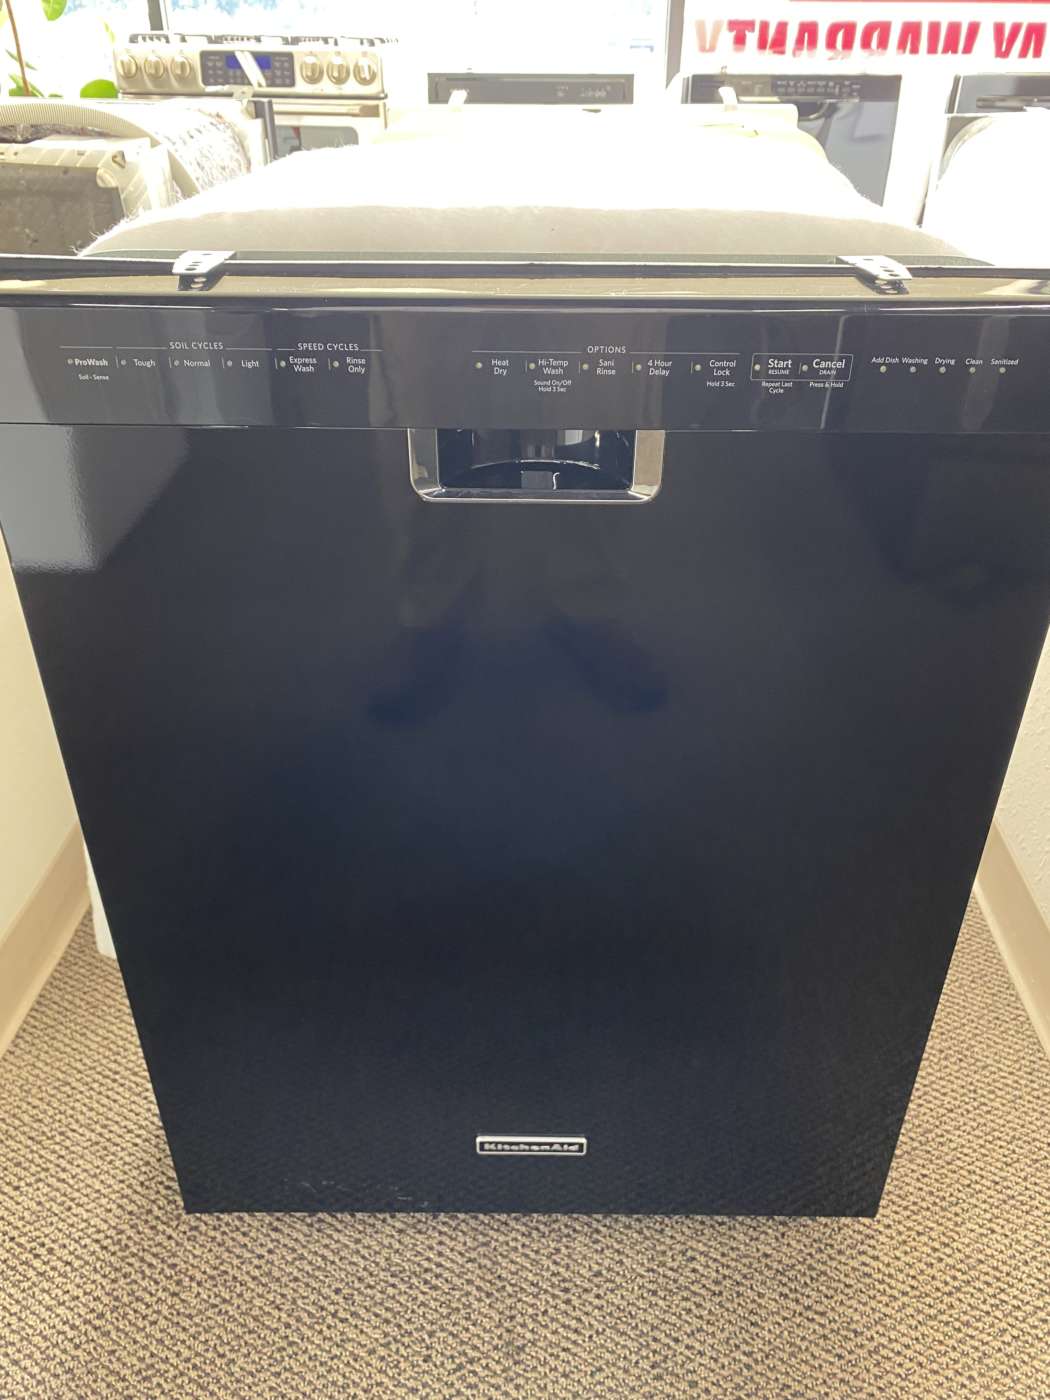 Reconditioned KITCHENAID Stainless-Tub Built-In Dishwasher – Black